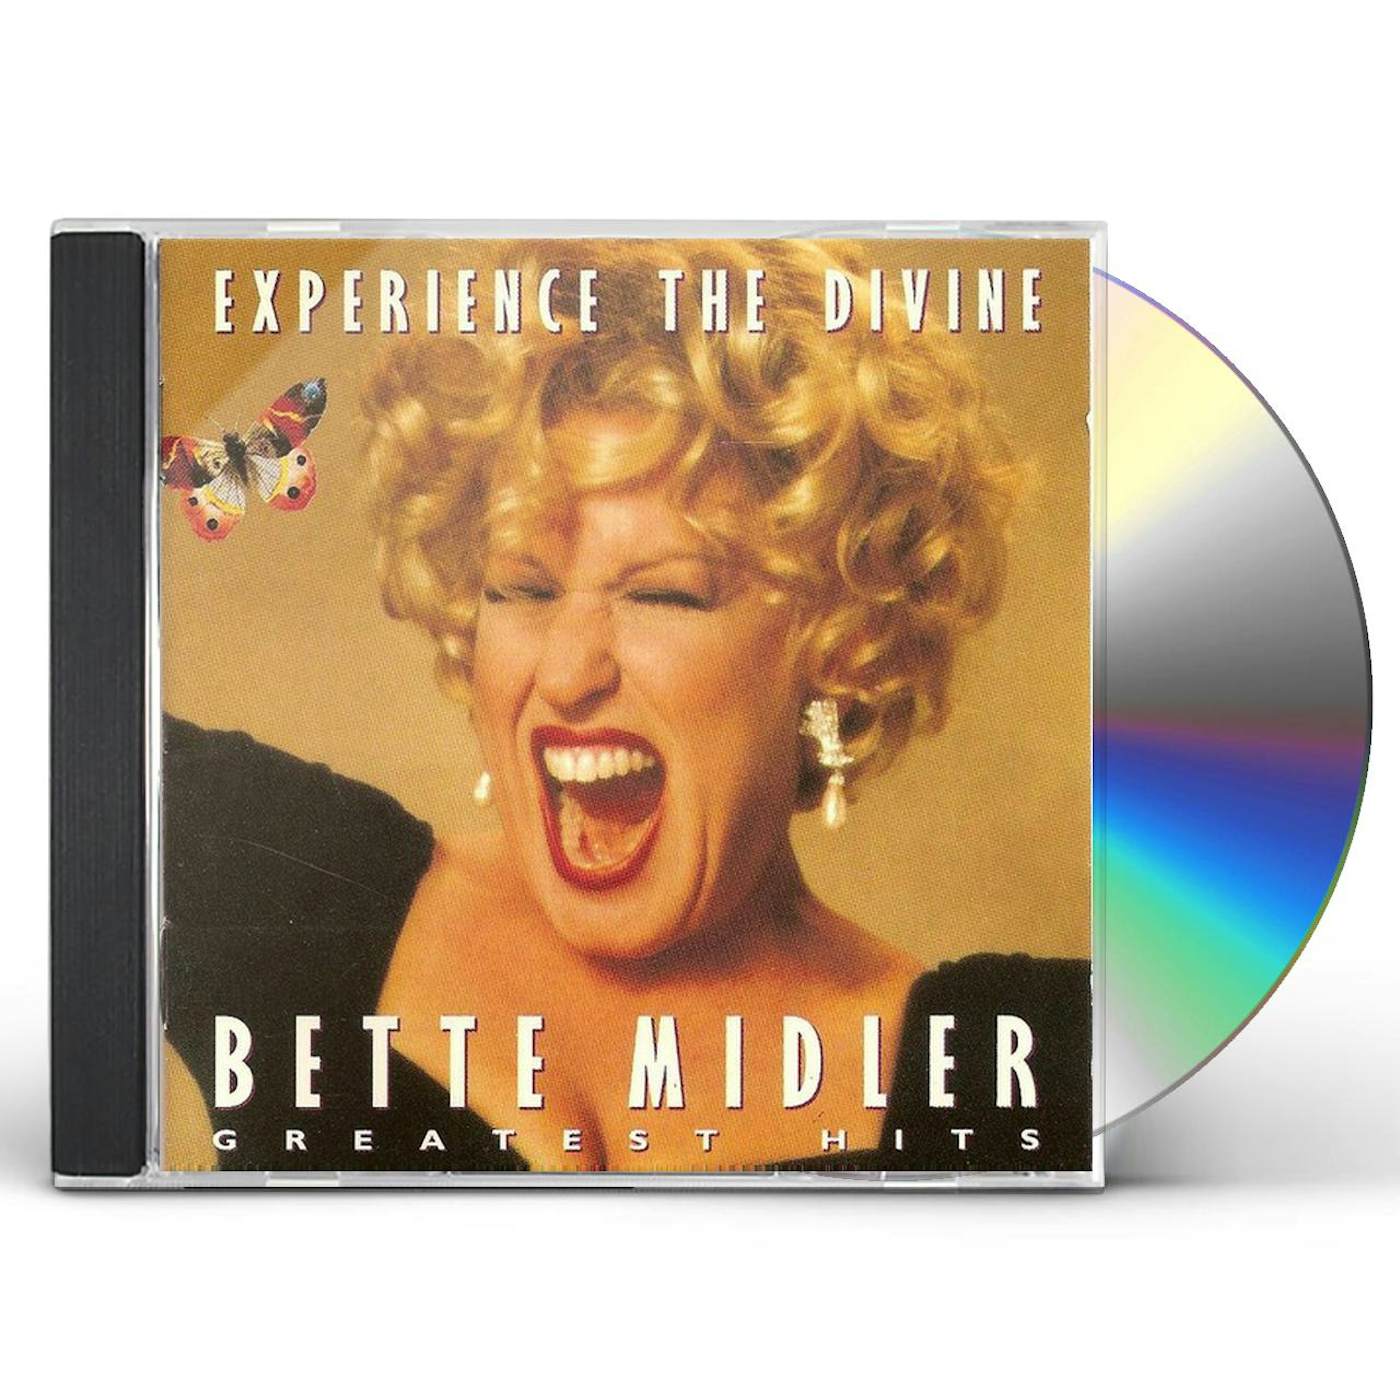 Bette Midler EXPERIENCE THE DIVINE: GREATEST HITS CD